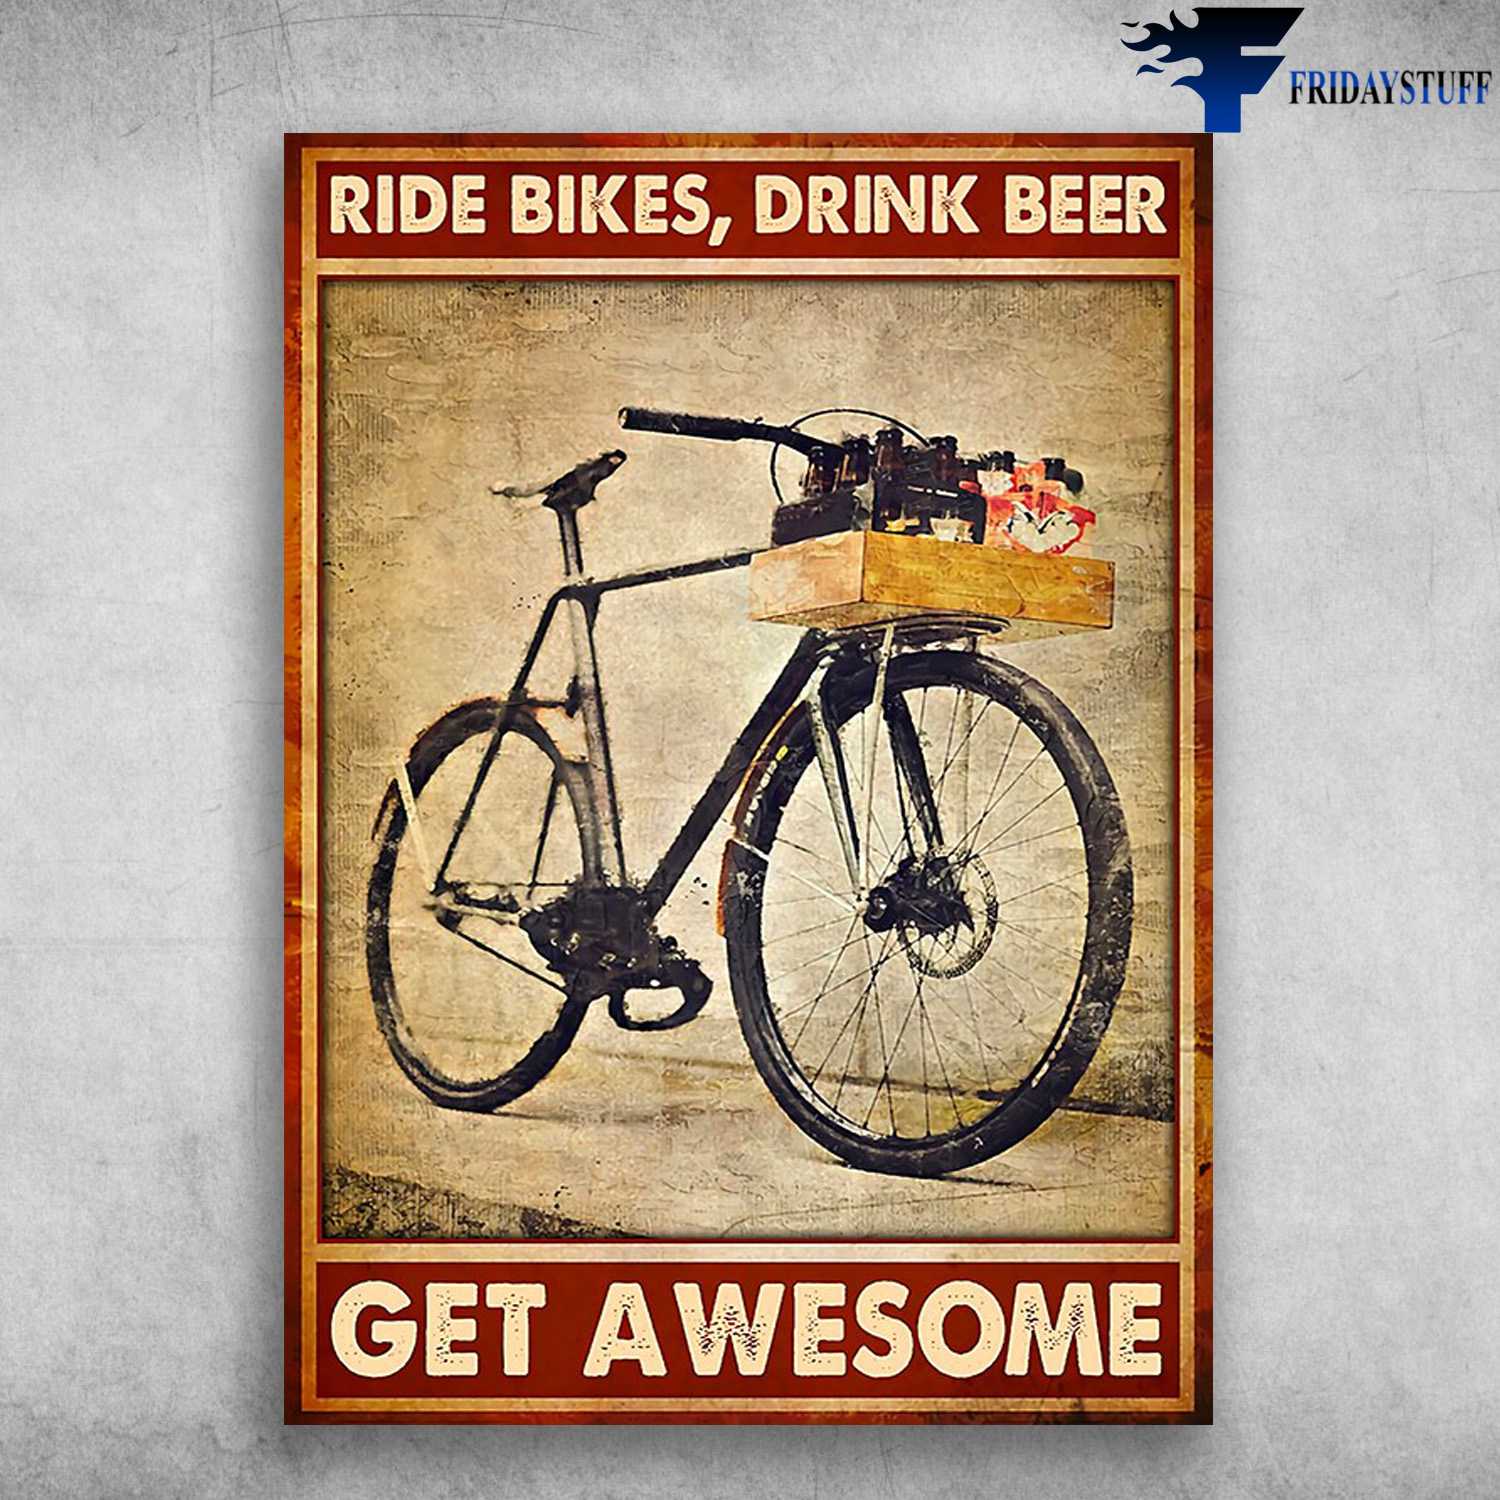 Bicycle Riding - Ride Bikers, Drink Beer, Get Awesome